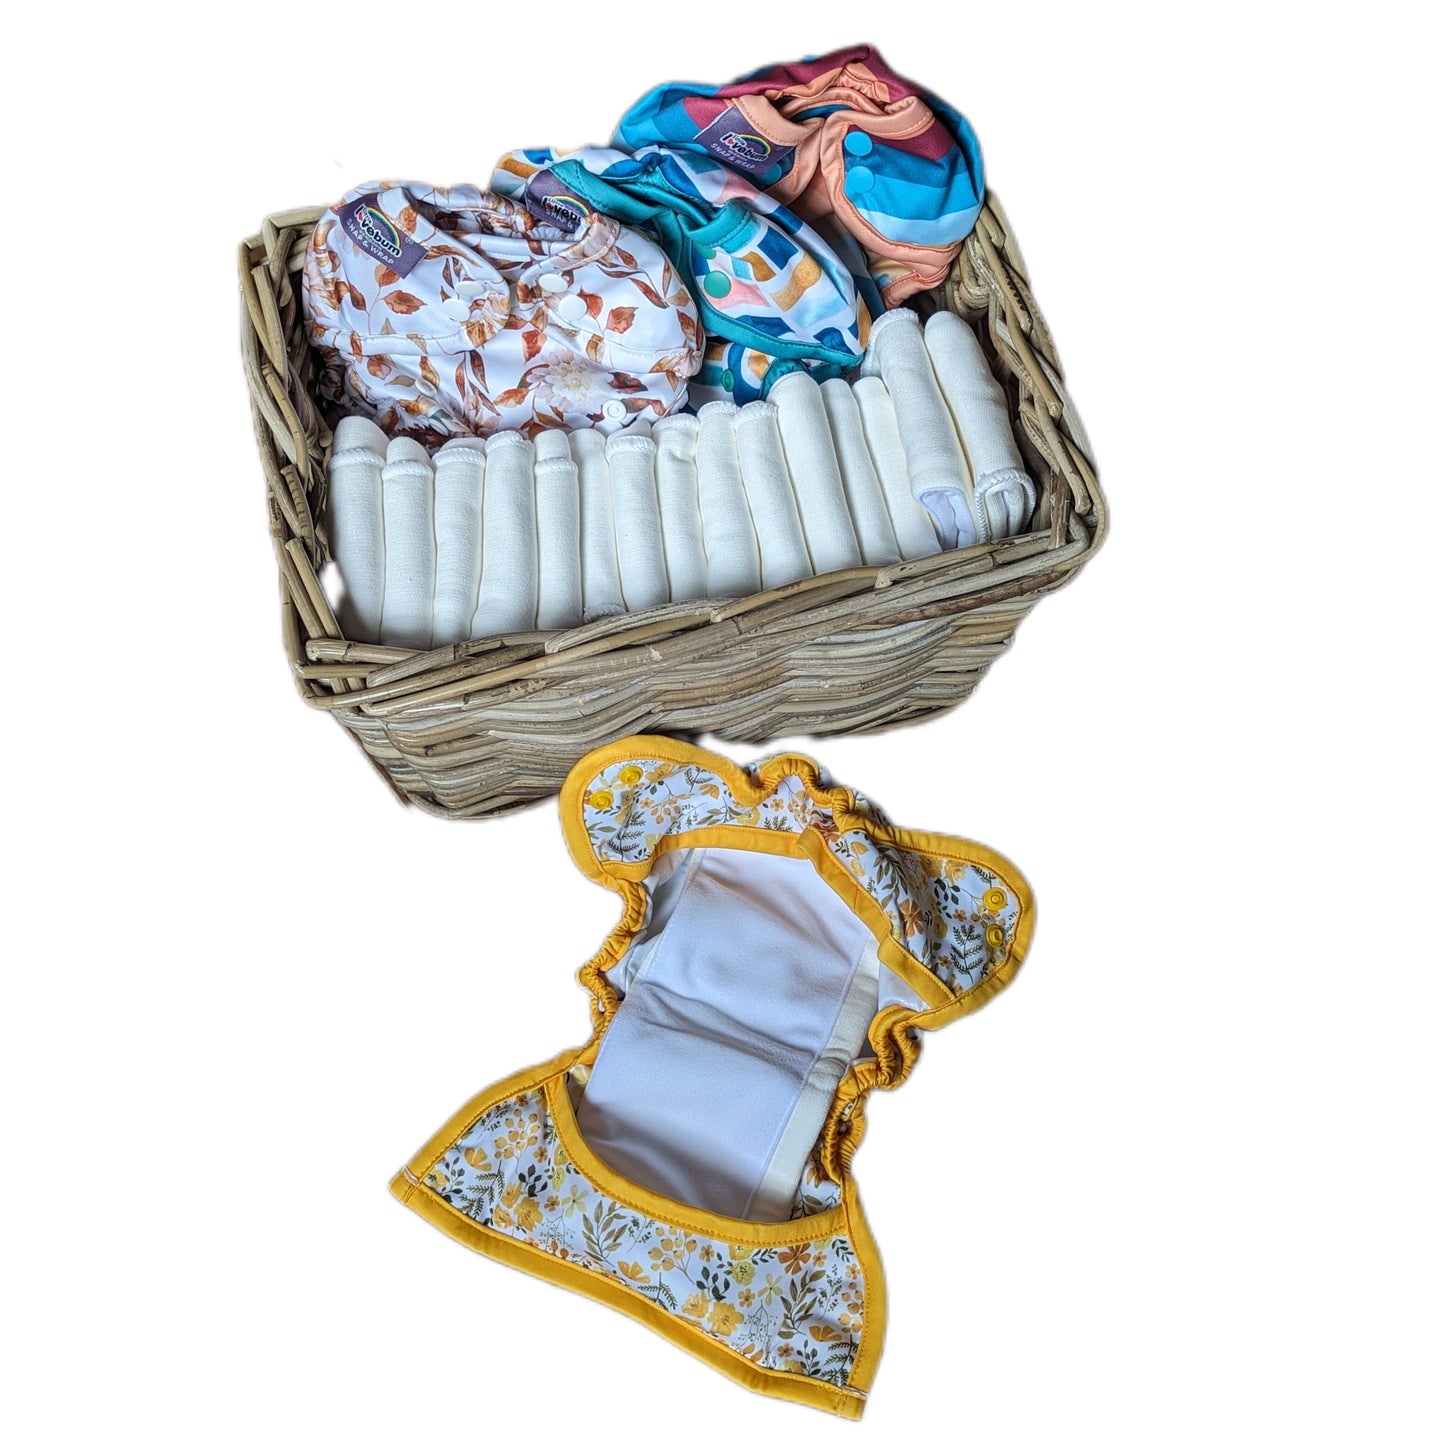 Little Lovebum - Newborn Snap and Wrap Kit-All In One Nappy-Little Love Bum-Akiho-The Nappy Market